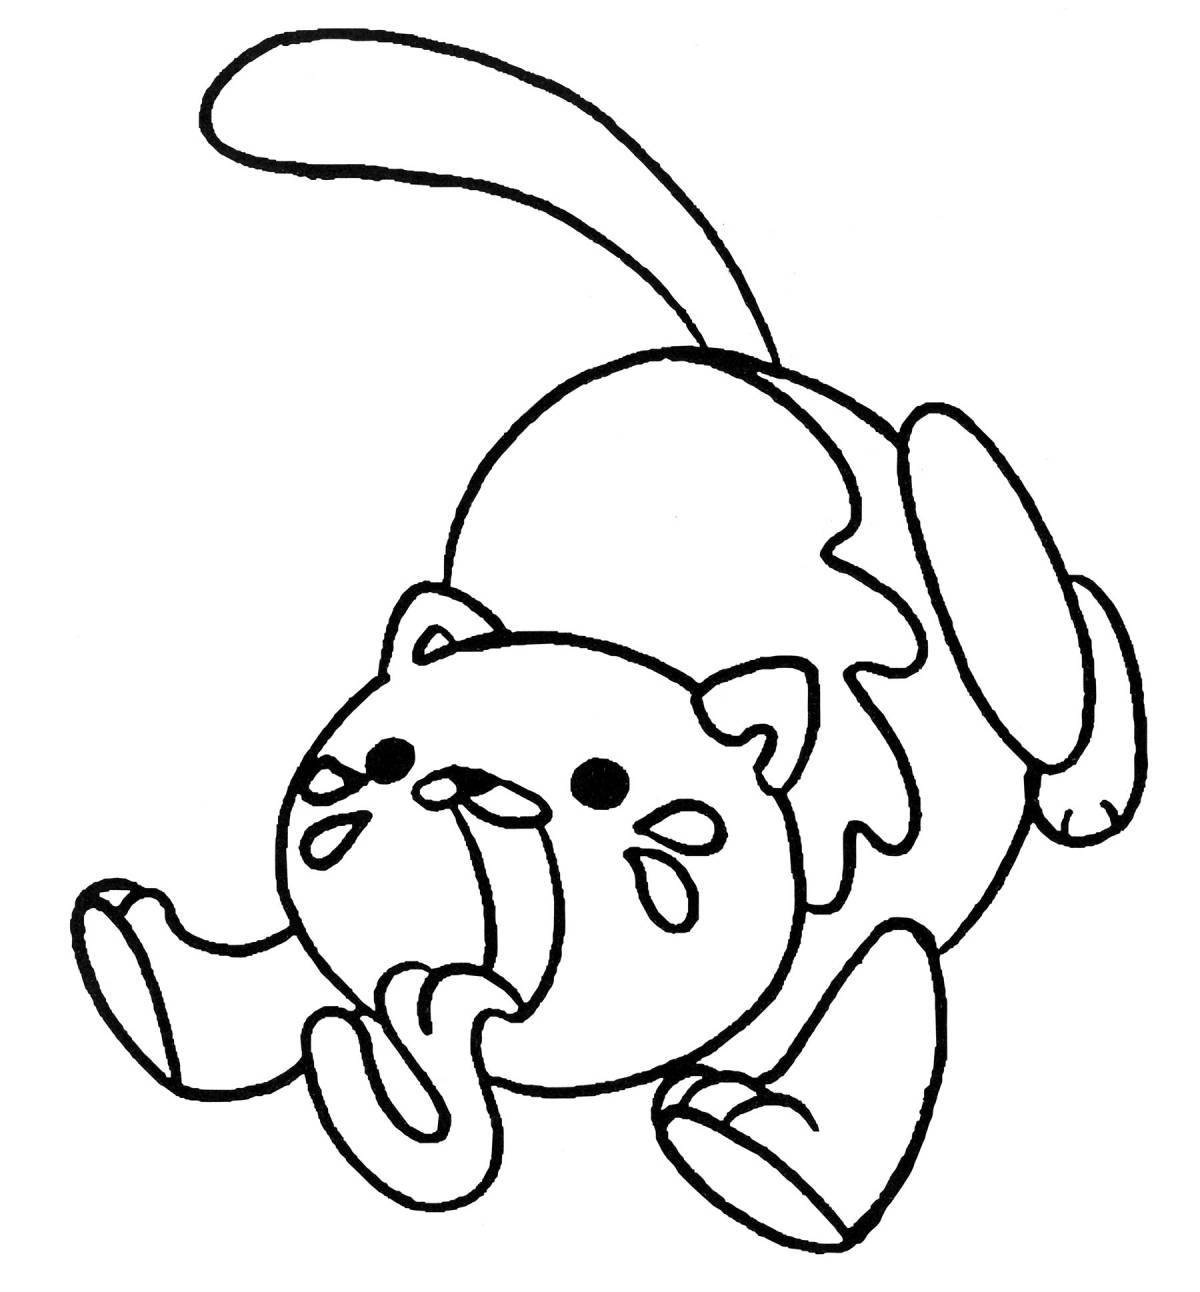 Animated dog caterpillar coloring page